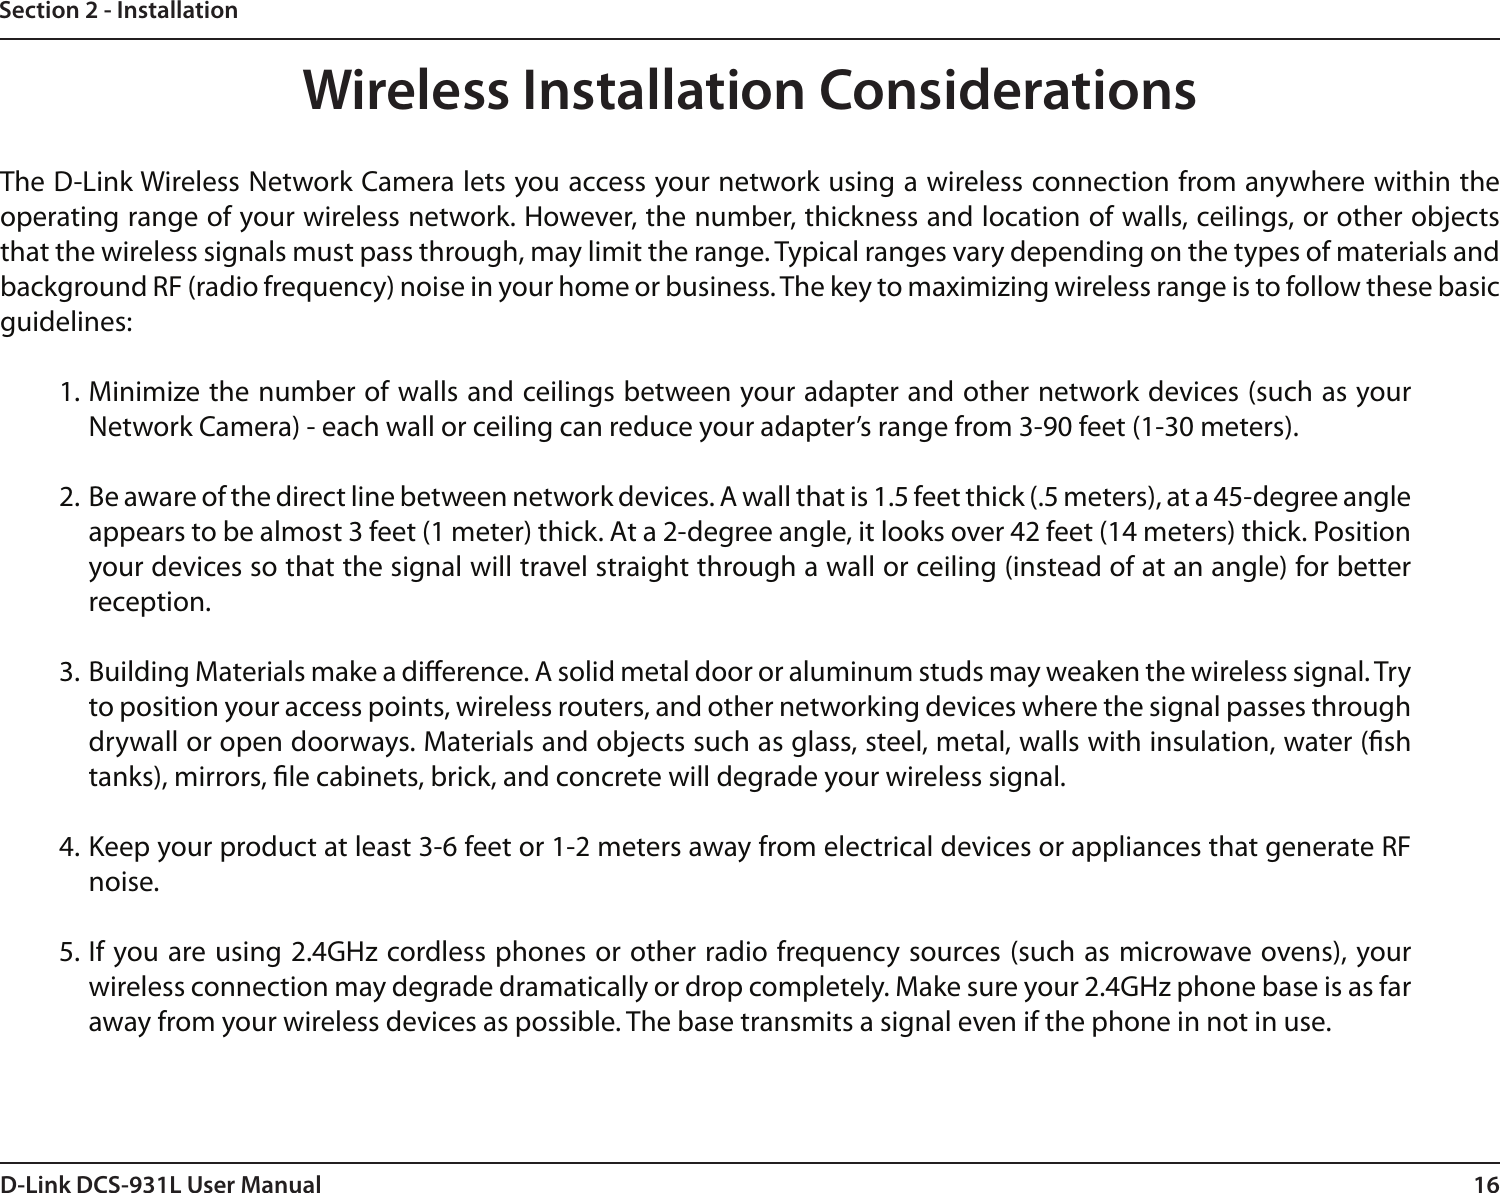 16D-Link DCS-931L User ManualSection 2 - InstallationWireless Installation ConsiderationsThe D-Link Wireless Network Camera lets you access your network using a wireless connection from anywhere within the operating range of your wireless network. However, the number, thickness and location of walls, ceilings, or other objects that the wireless signals must pass through, may limit the range. Typical ranges vary depending on the types of materials and background RF (radio frequency) noise in your home or business. The key to maximizing wireless range is to follow these basic guidelines:1. Minimize the number of walls and ceilings between your adapter and other network devices (such as your Network Camera) - each wall or ceiling can reduce your adapter’s range from 3-90 feet (1-30 meters).2. Be aware of the direct line between network devices. A wall that is 1.5 feet thick (.5 meters), at a 45-degree angle appears to be almost 3 feet (1 meter) thick. At a 2-degree angle, it looks over 42 feet (14 meters) thick. Position your devices so that the signal will travel straight through a wall or ceiling (instead of at an angle) for better reception.3. Building Materials make a dierence. A solid metal door or aluminum studs may weaken the wireless signal. Try to position your access points, wireless routers, and other networking devices where the signal passes through drywall or open doorways. Materials and objects such as glass, steel, metal, walls with insulation, water (sh tanks), mirrors, le cabinets, brick, and concrete will degrade your wireless signal.4. Keep your product at least 3-6 feet or 1-2 meters away from electrical devices or appliances that generate RF noise.5. If you are using 2.4GHz cordless phones or other radio frequency sources (such as microwave ovens), your wireless connection may degrade dramatically or drop completely. Make sure your 2.4GHz phone base is as far away from your wireless devices as possible. The base transmits a signal even if the phone in not in use.